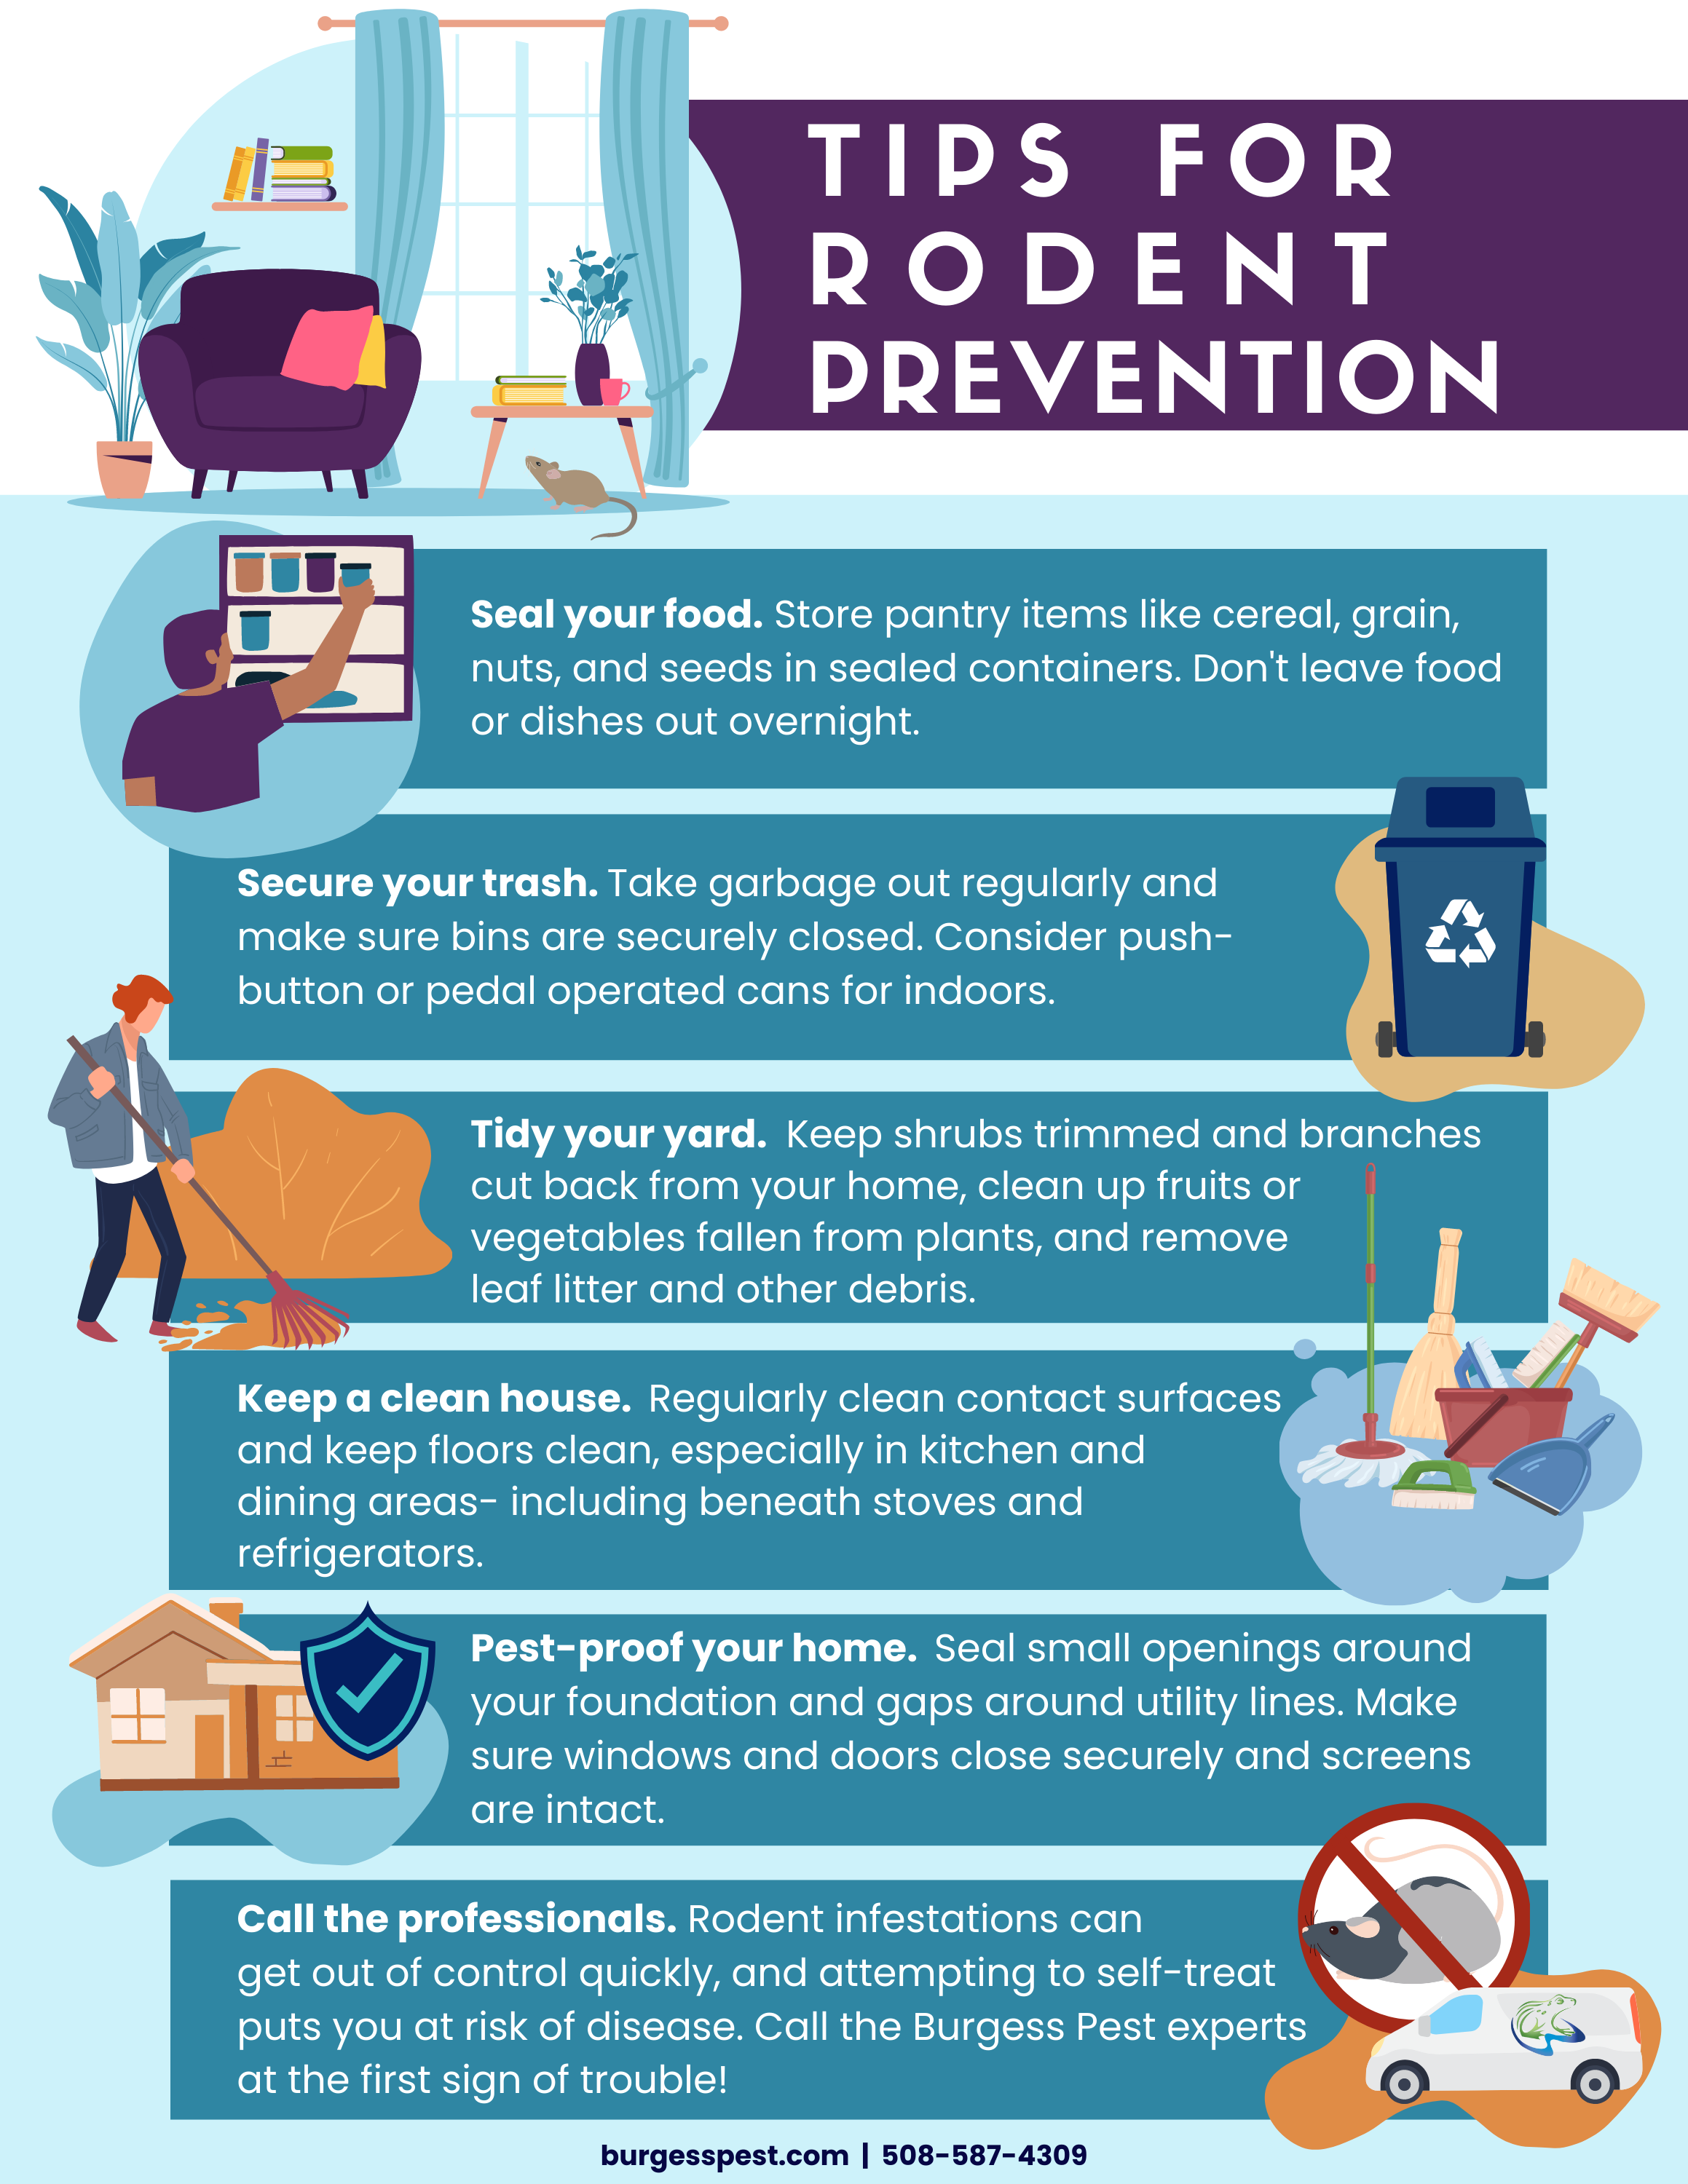 DIY Rodent Prevention Tips [INFOGRAPHIC]